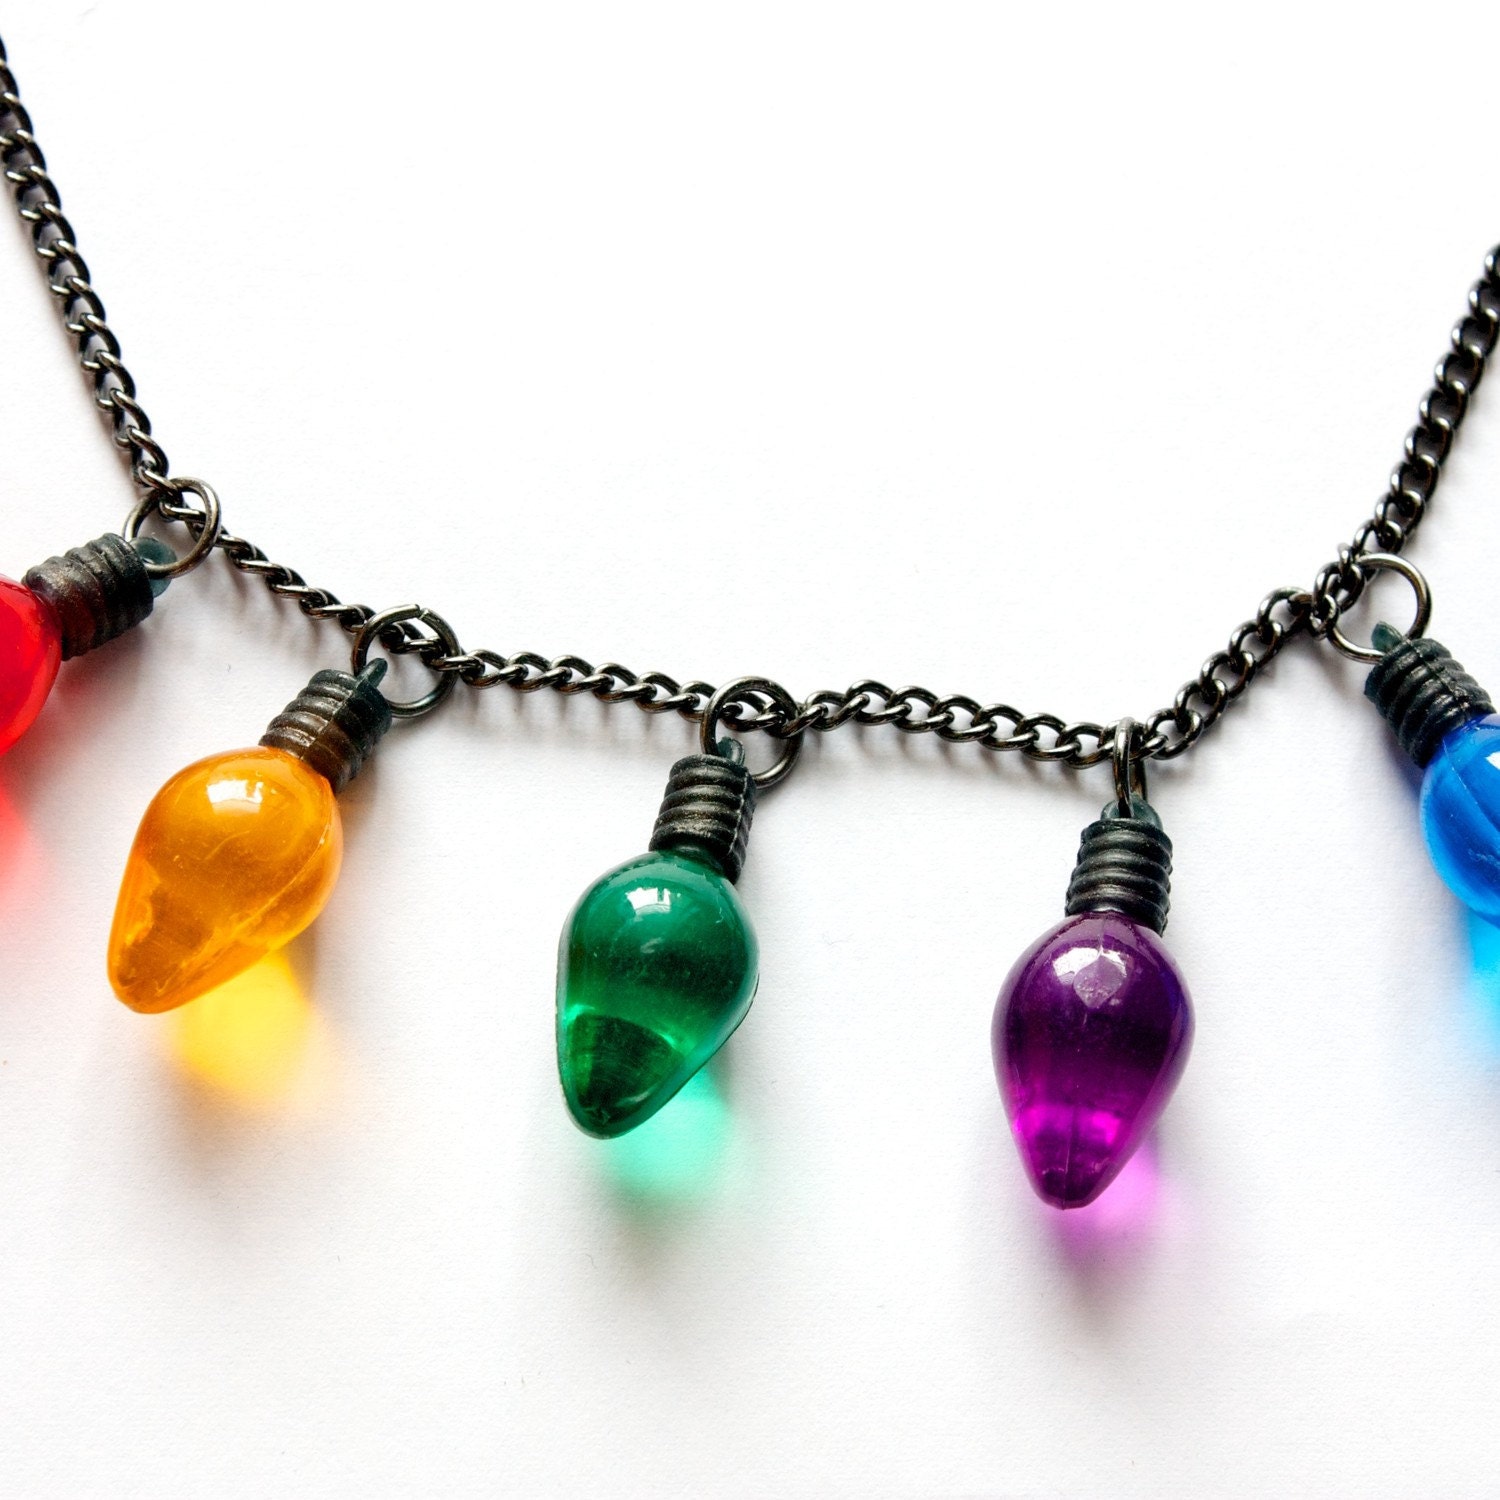 Items similar to Christmas Lights Necklace on Etsy